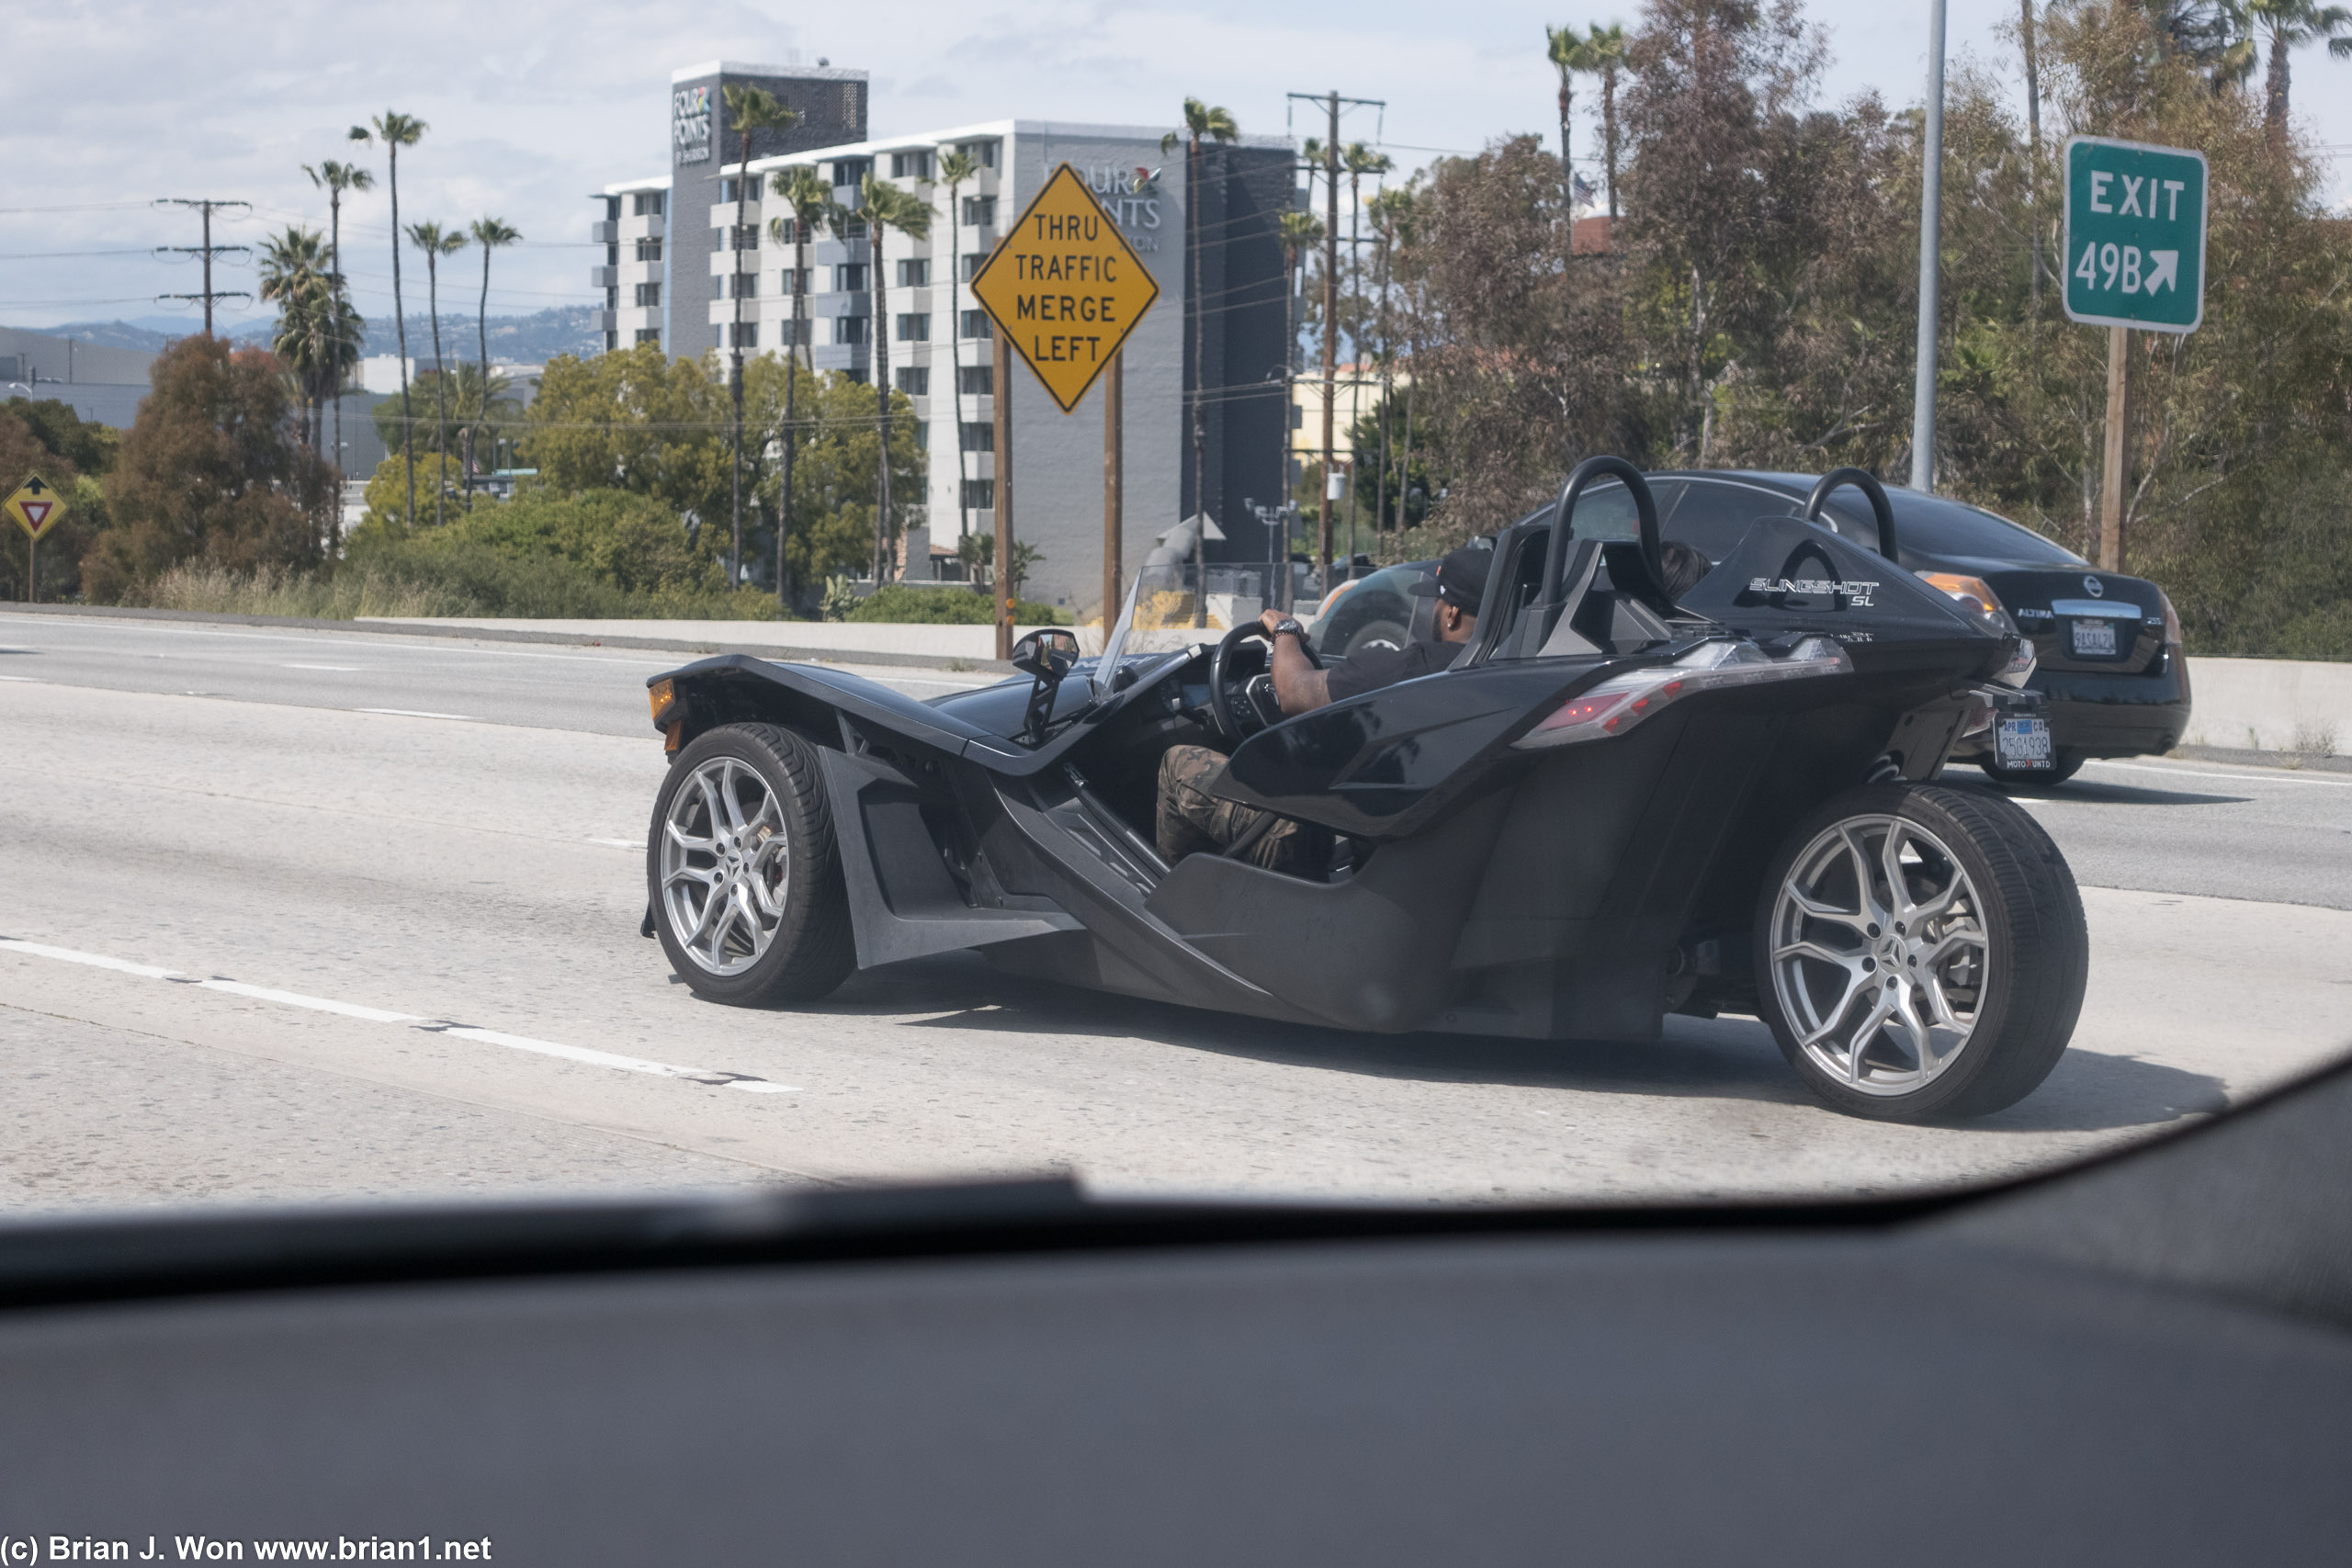 What's with all the Polaris Slingshots on the road lately?